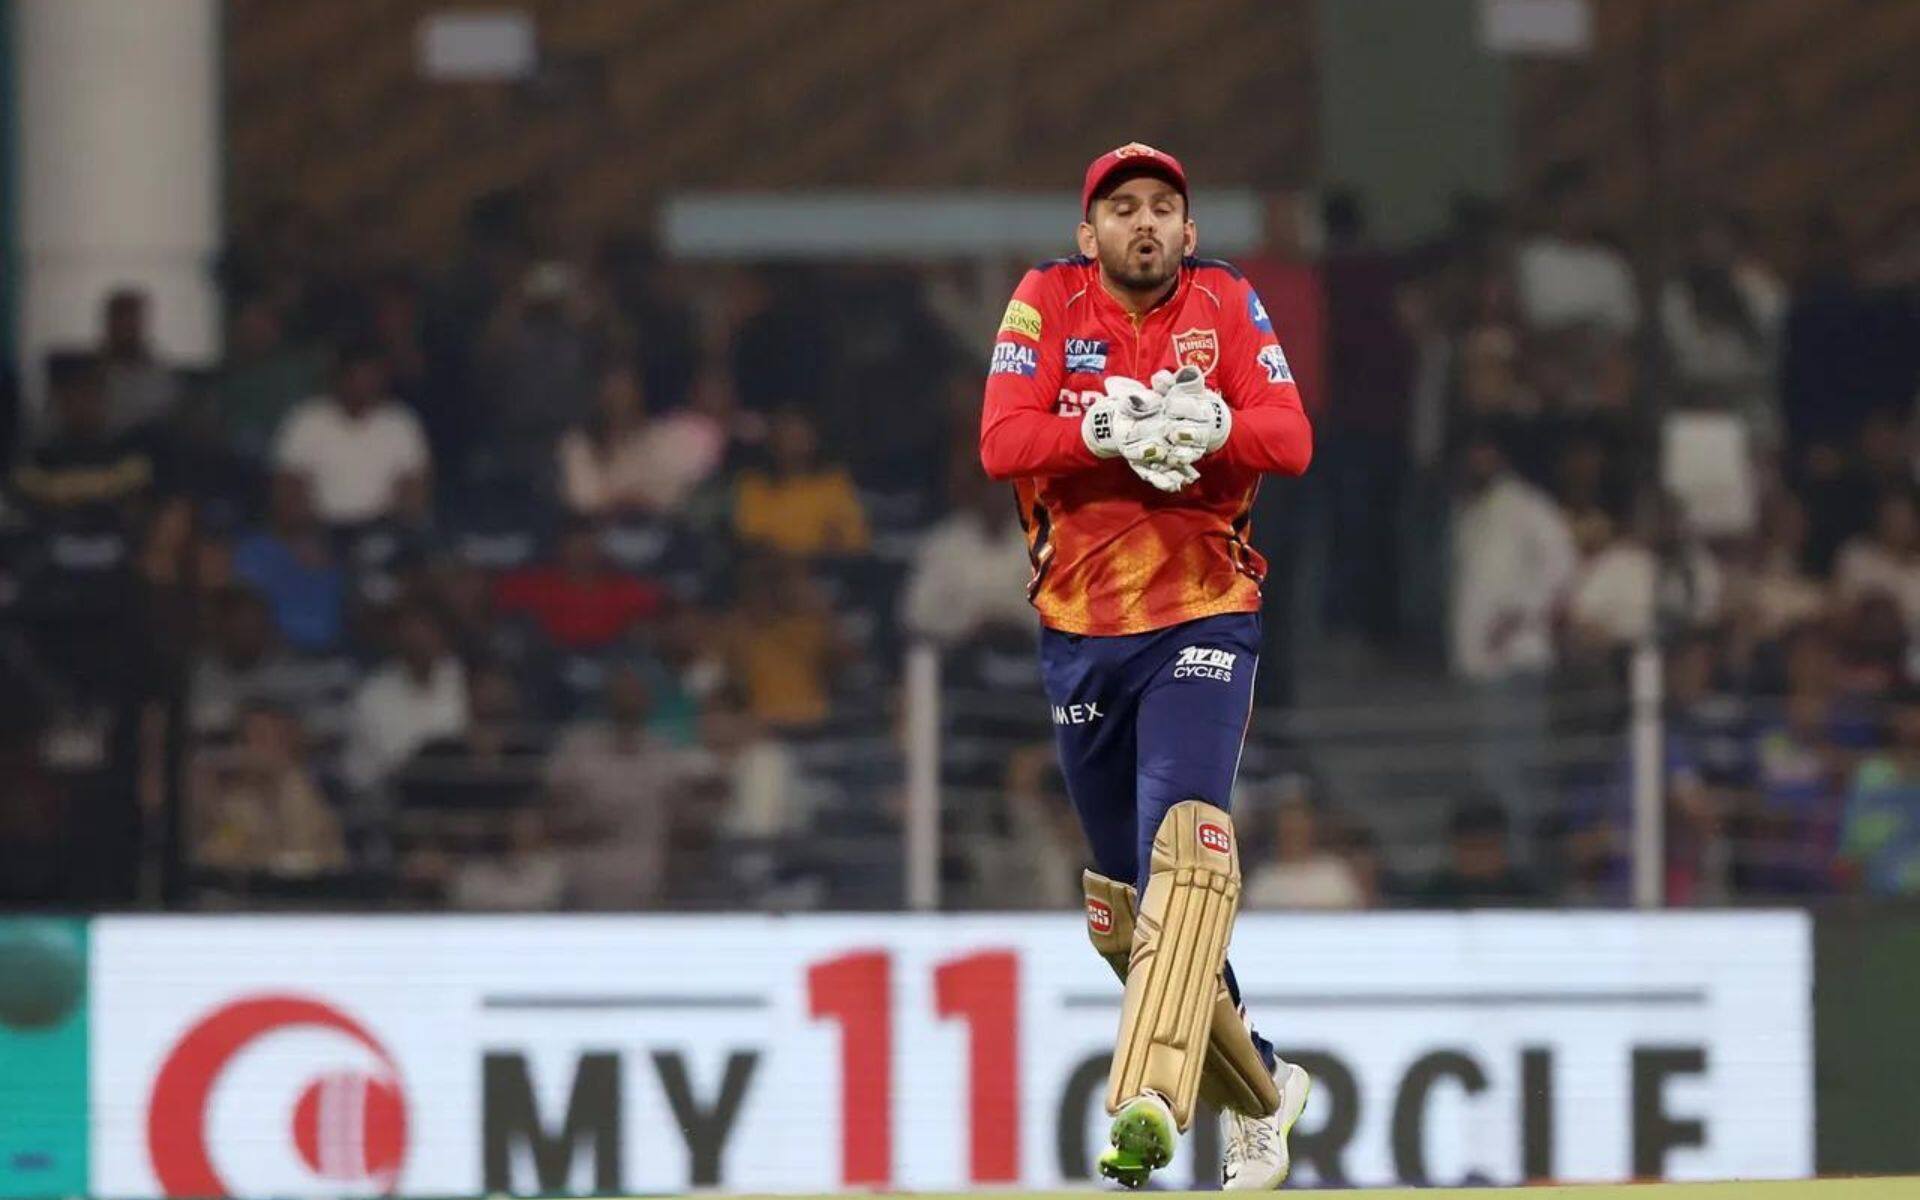 Jitesh Sharma with his steady technique could be an important pick for the game [iplt20.com]